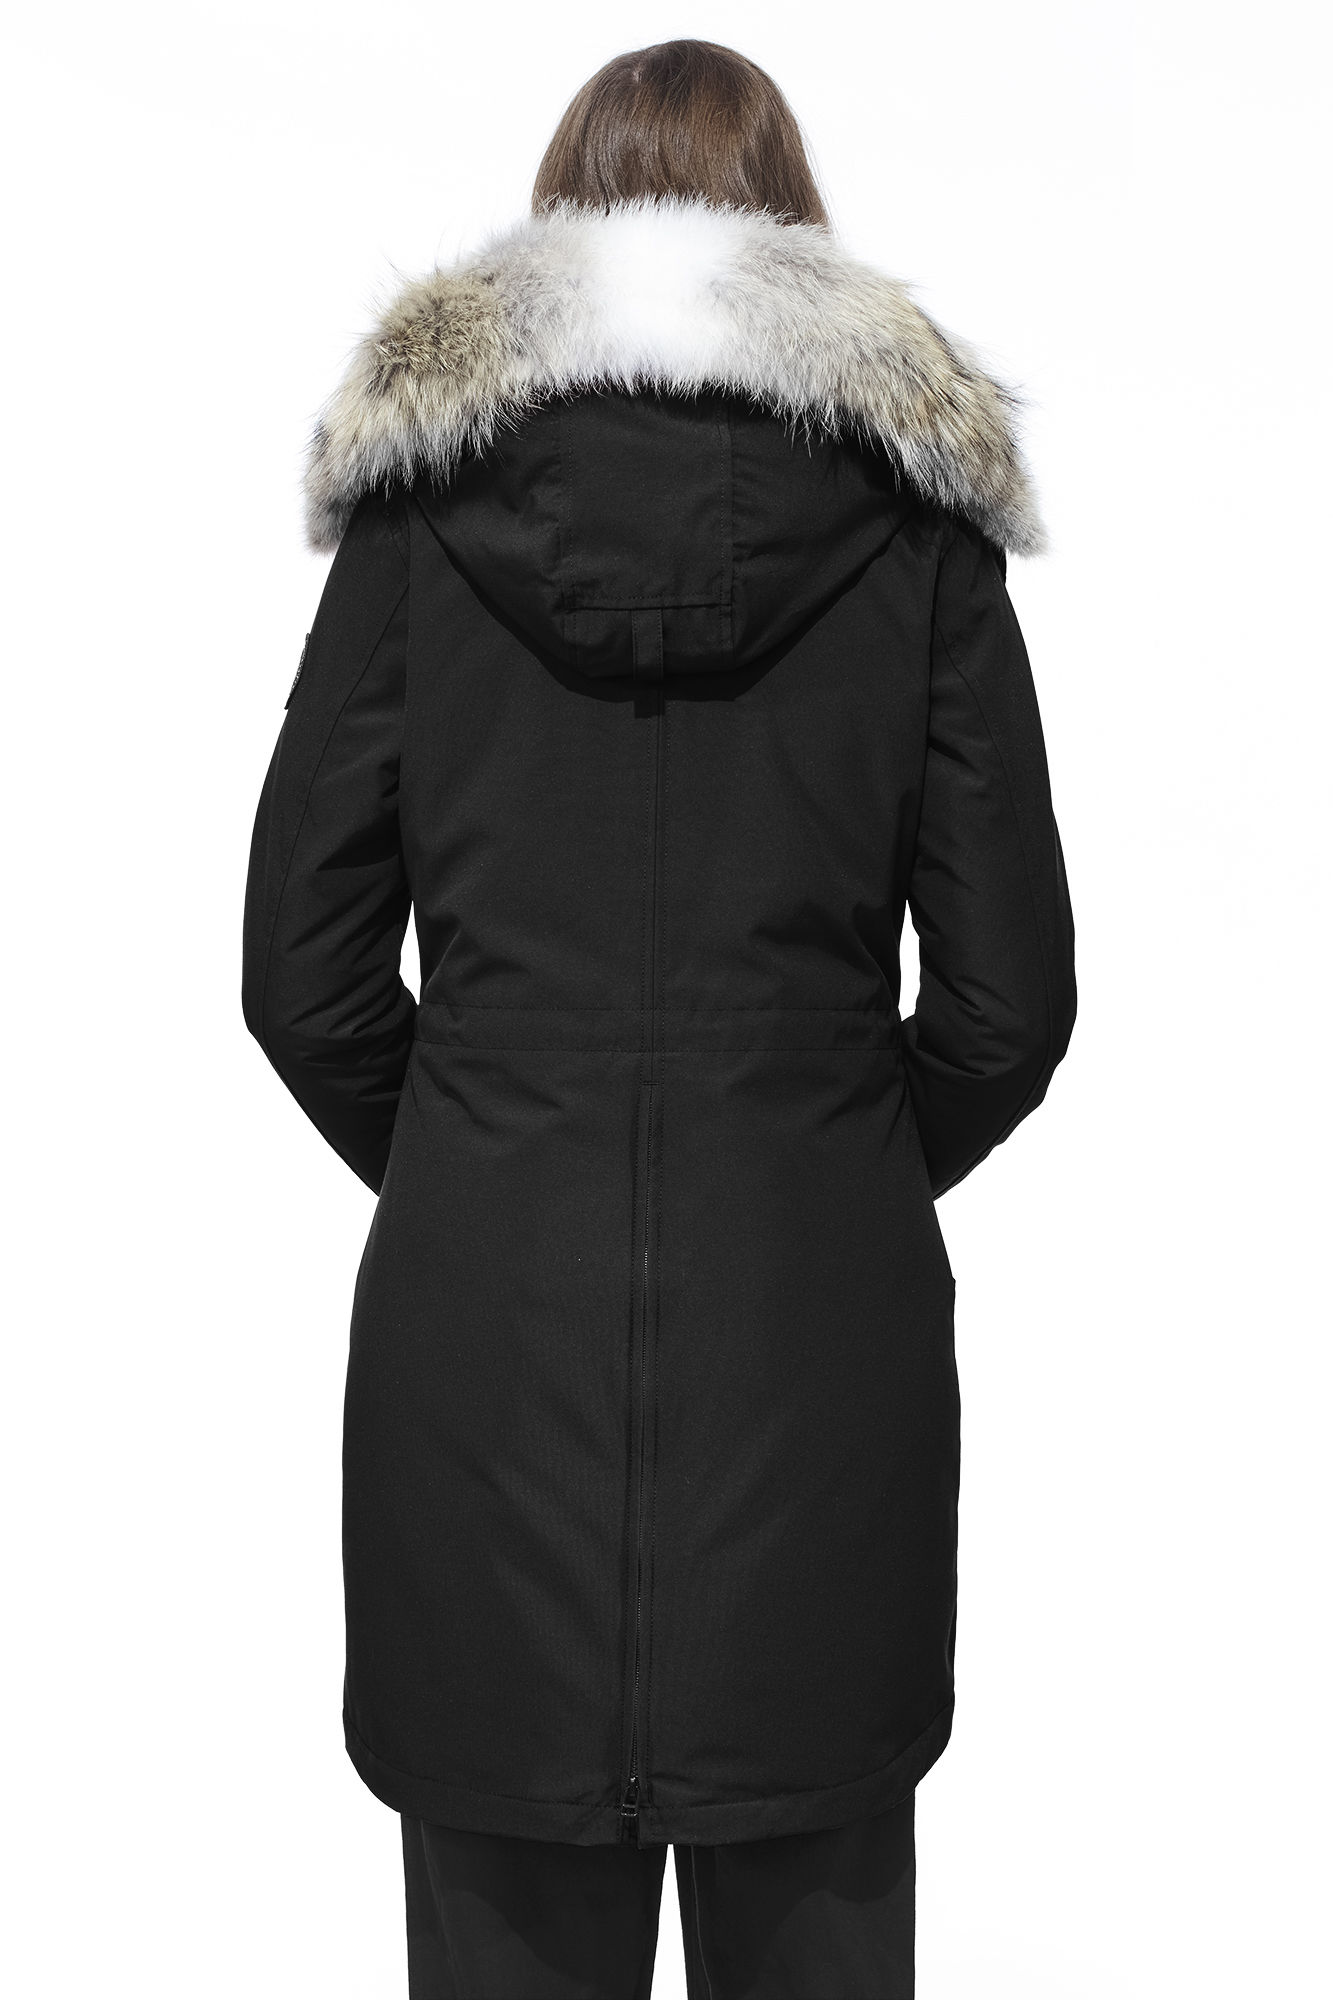 Down Jackets CANADIAN Goose Jacket women New Duck Down Couple Coat Parka Real Fur Collar